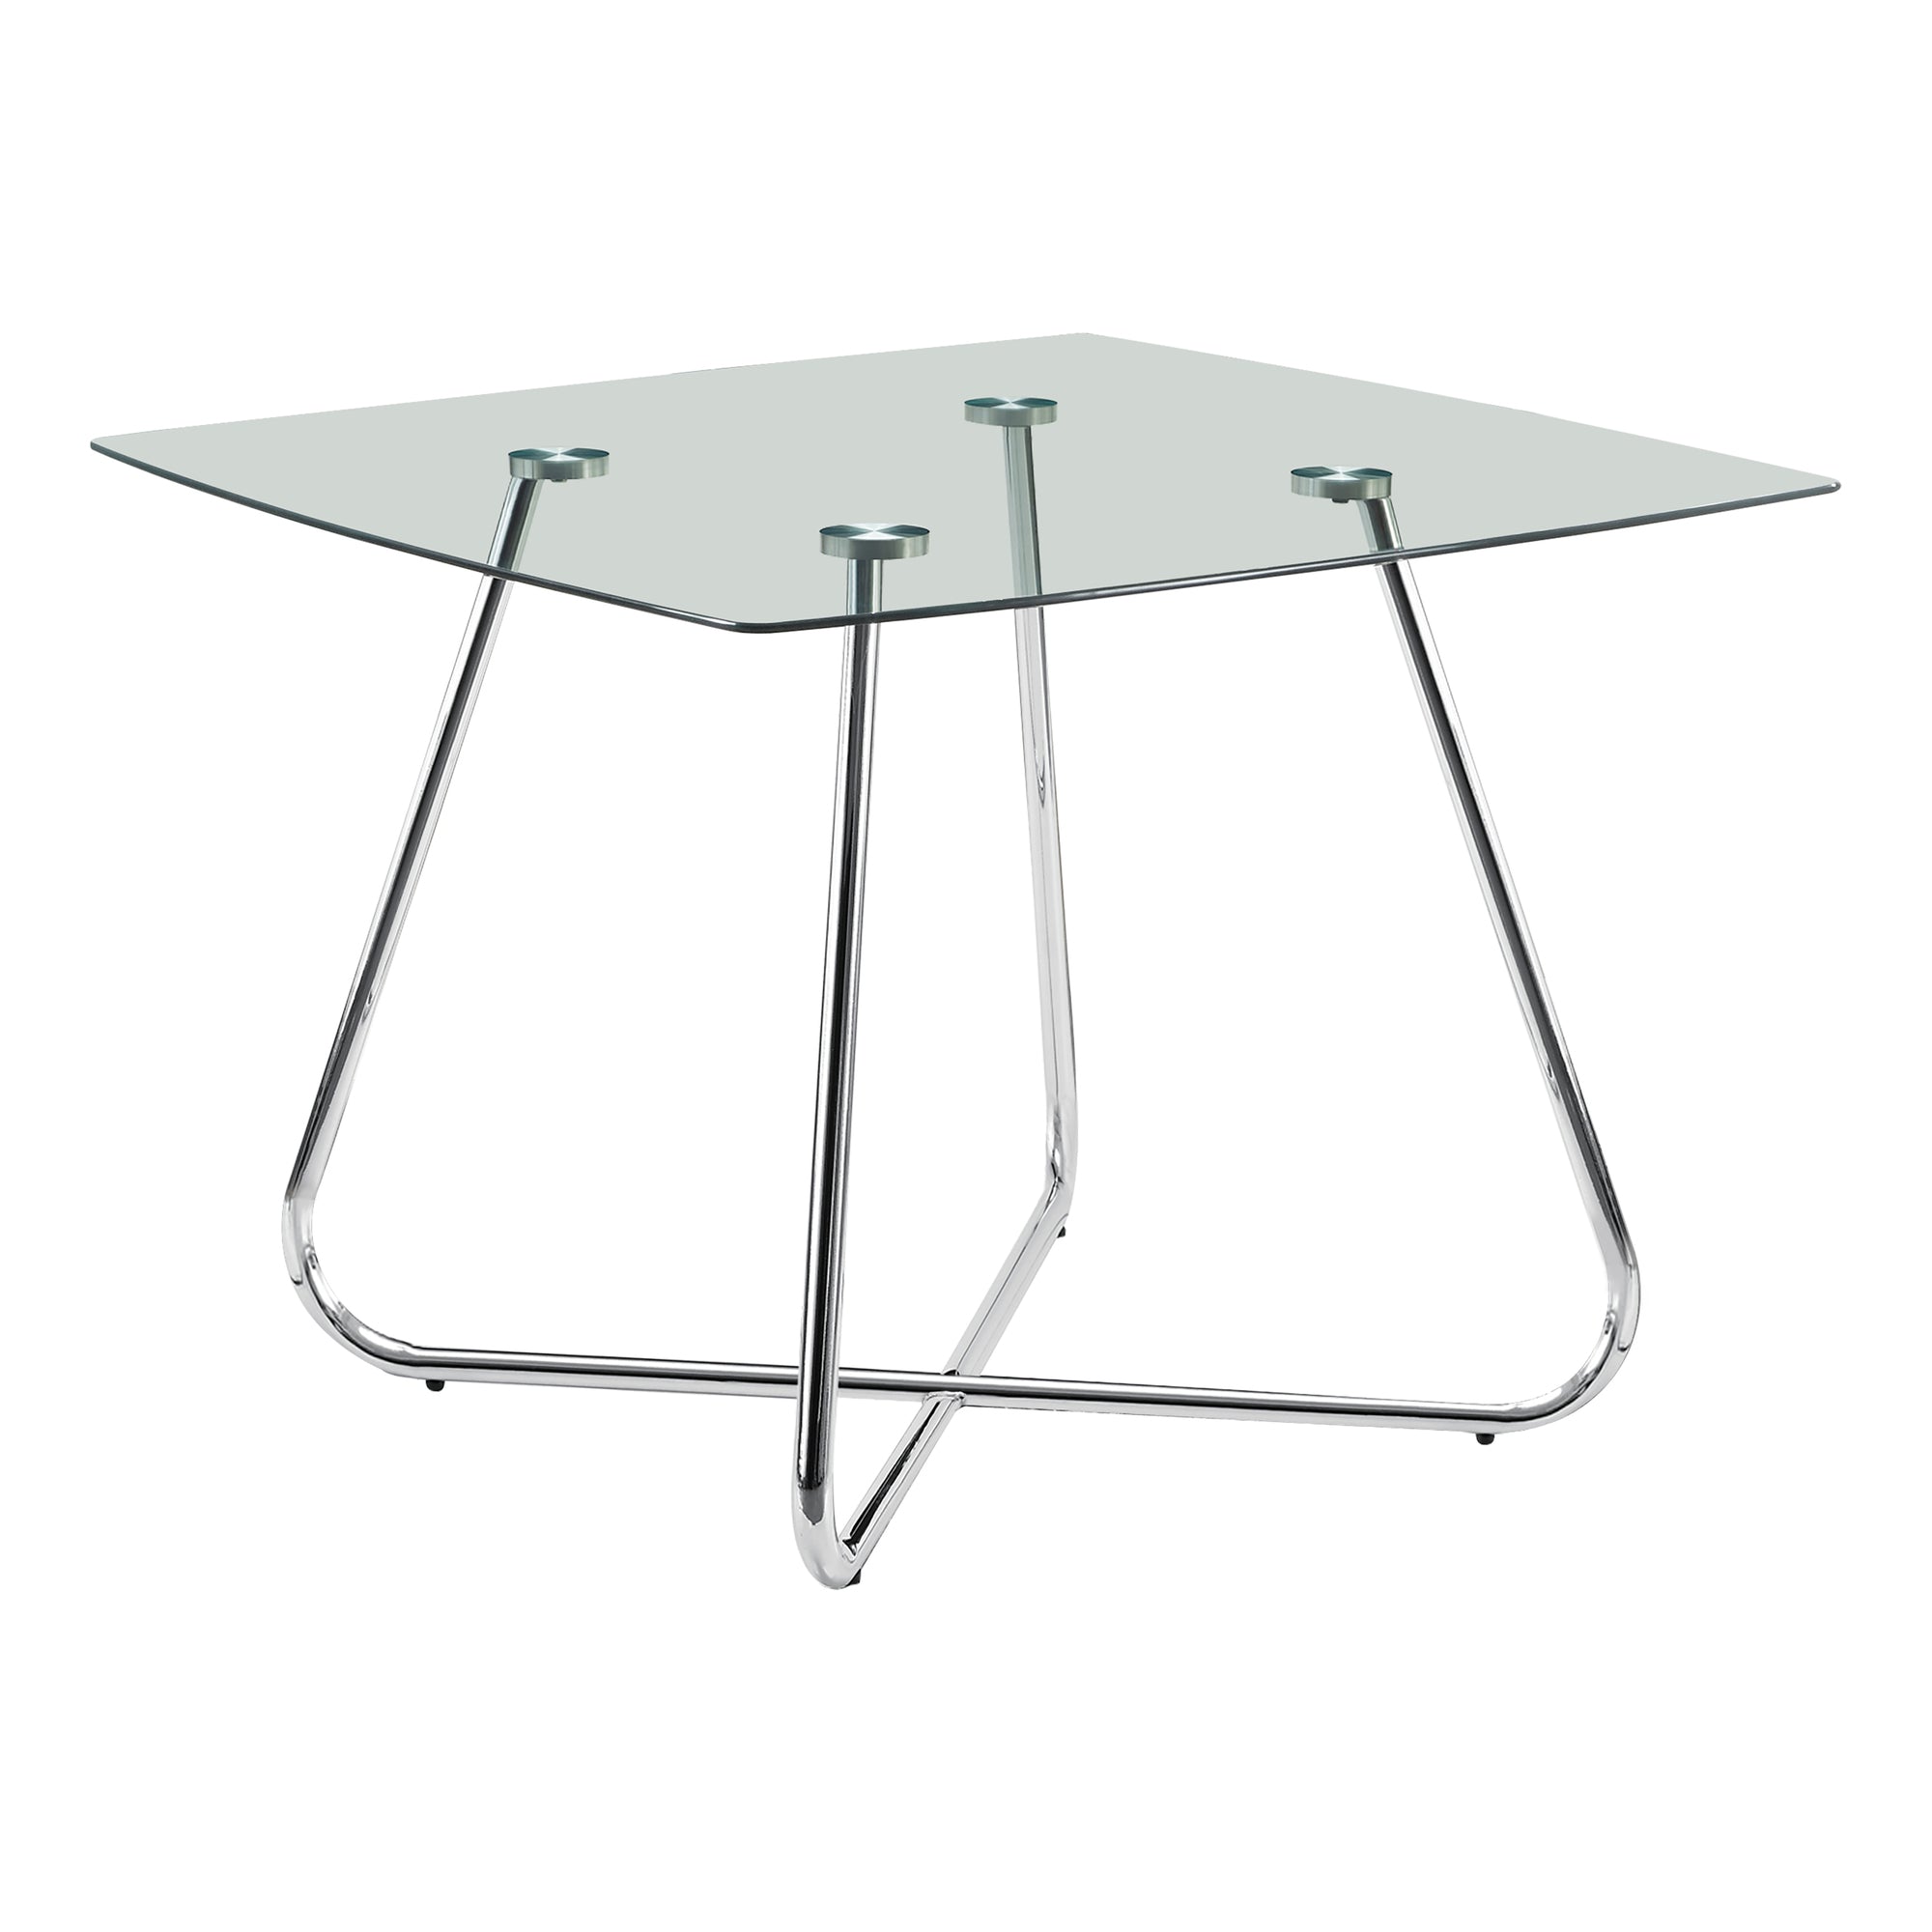 MN-351070    Dining Table, 48" Rectangular, Metal, Tempered Glass, Kitchen, Dining Room, Metal Legs, Tempered Glass, Chrome, Clear, Contemporary, Modern